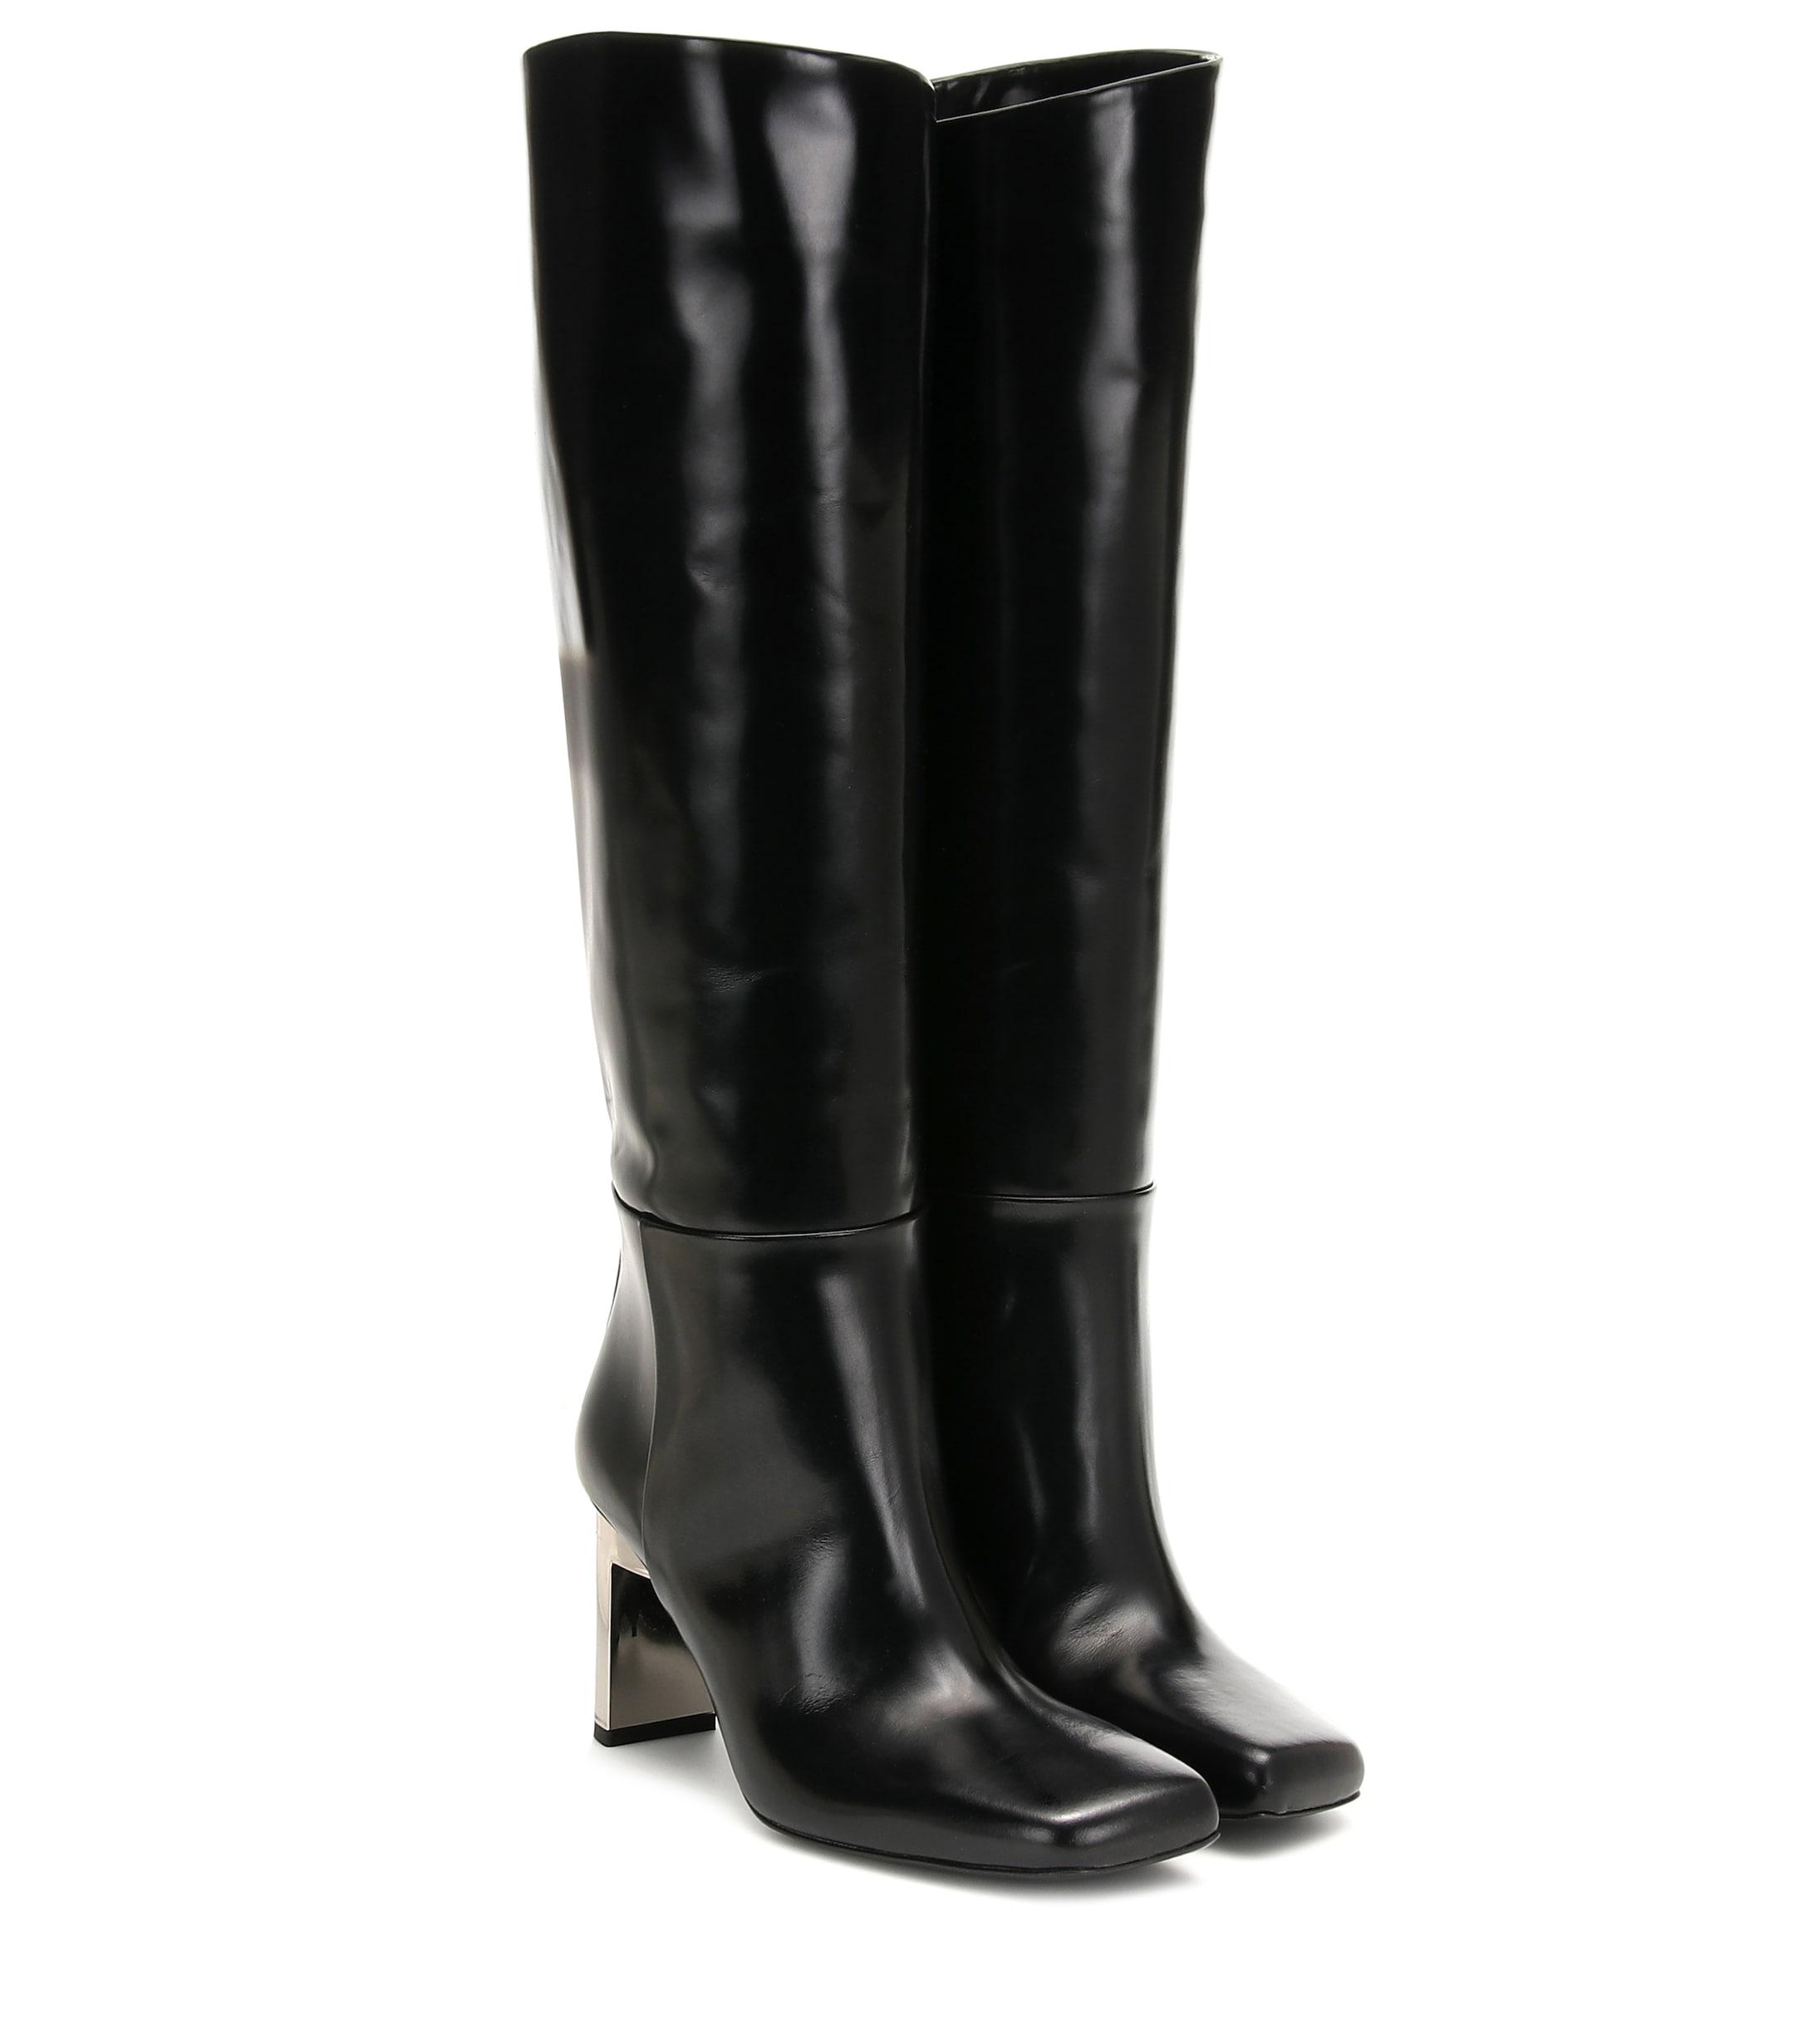 1017 ALYX 9SM Leather Knee-high Boots in Black - Lyst